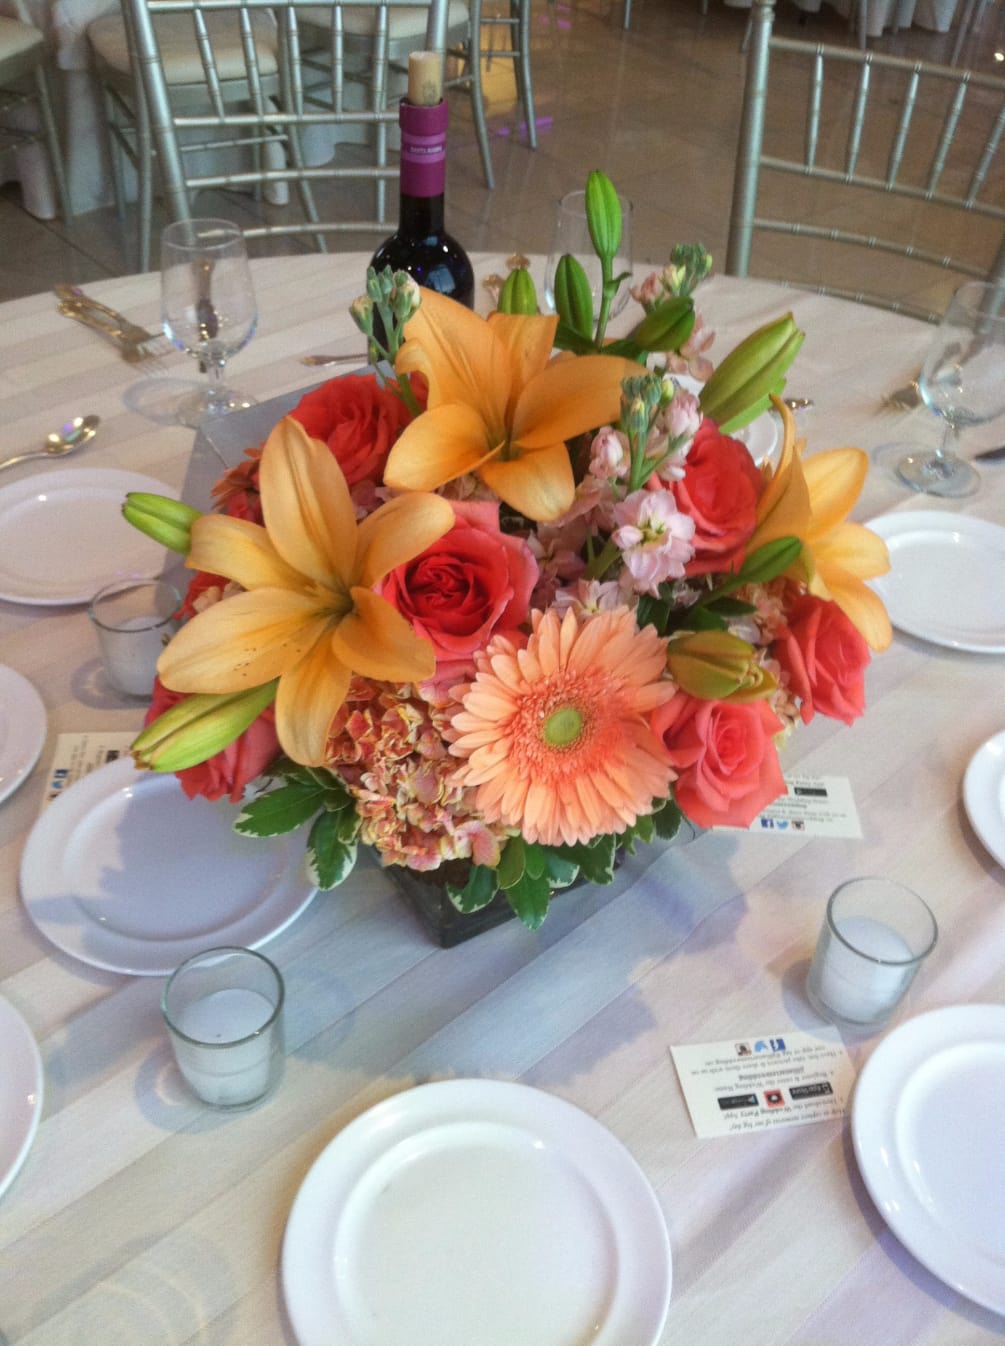 Great for parties, weddings, and even send as a birthday surprise!
Lilies, roses